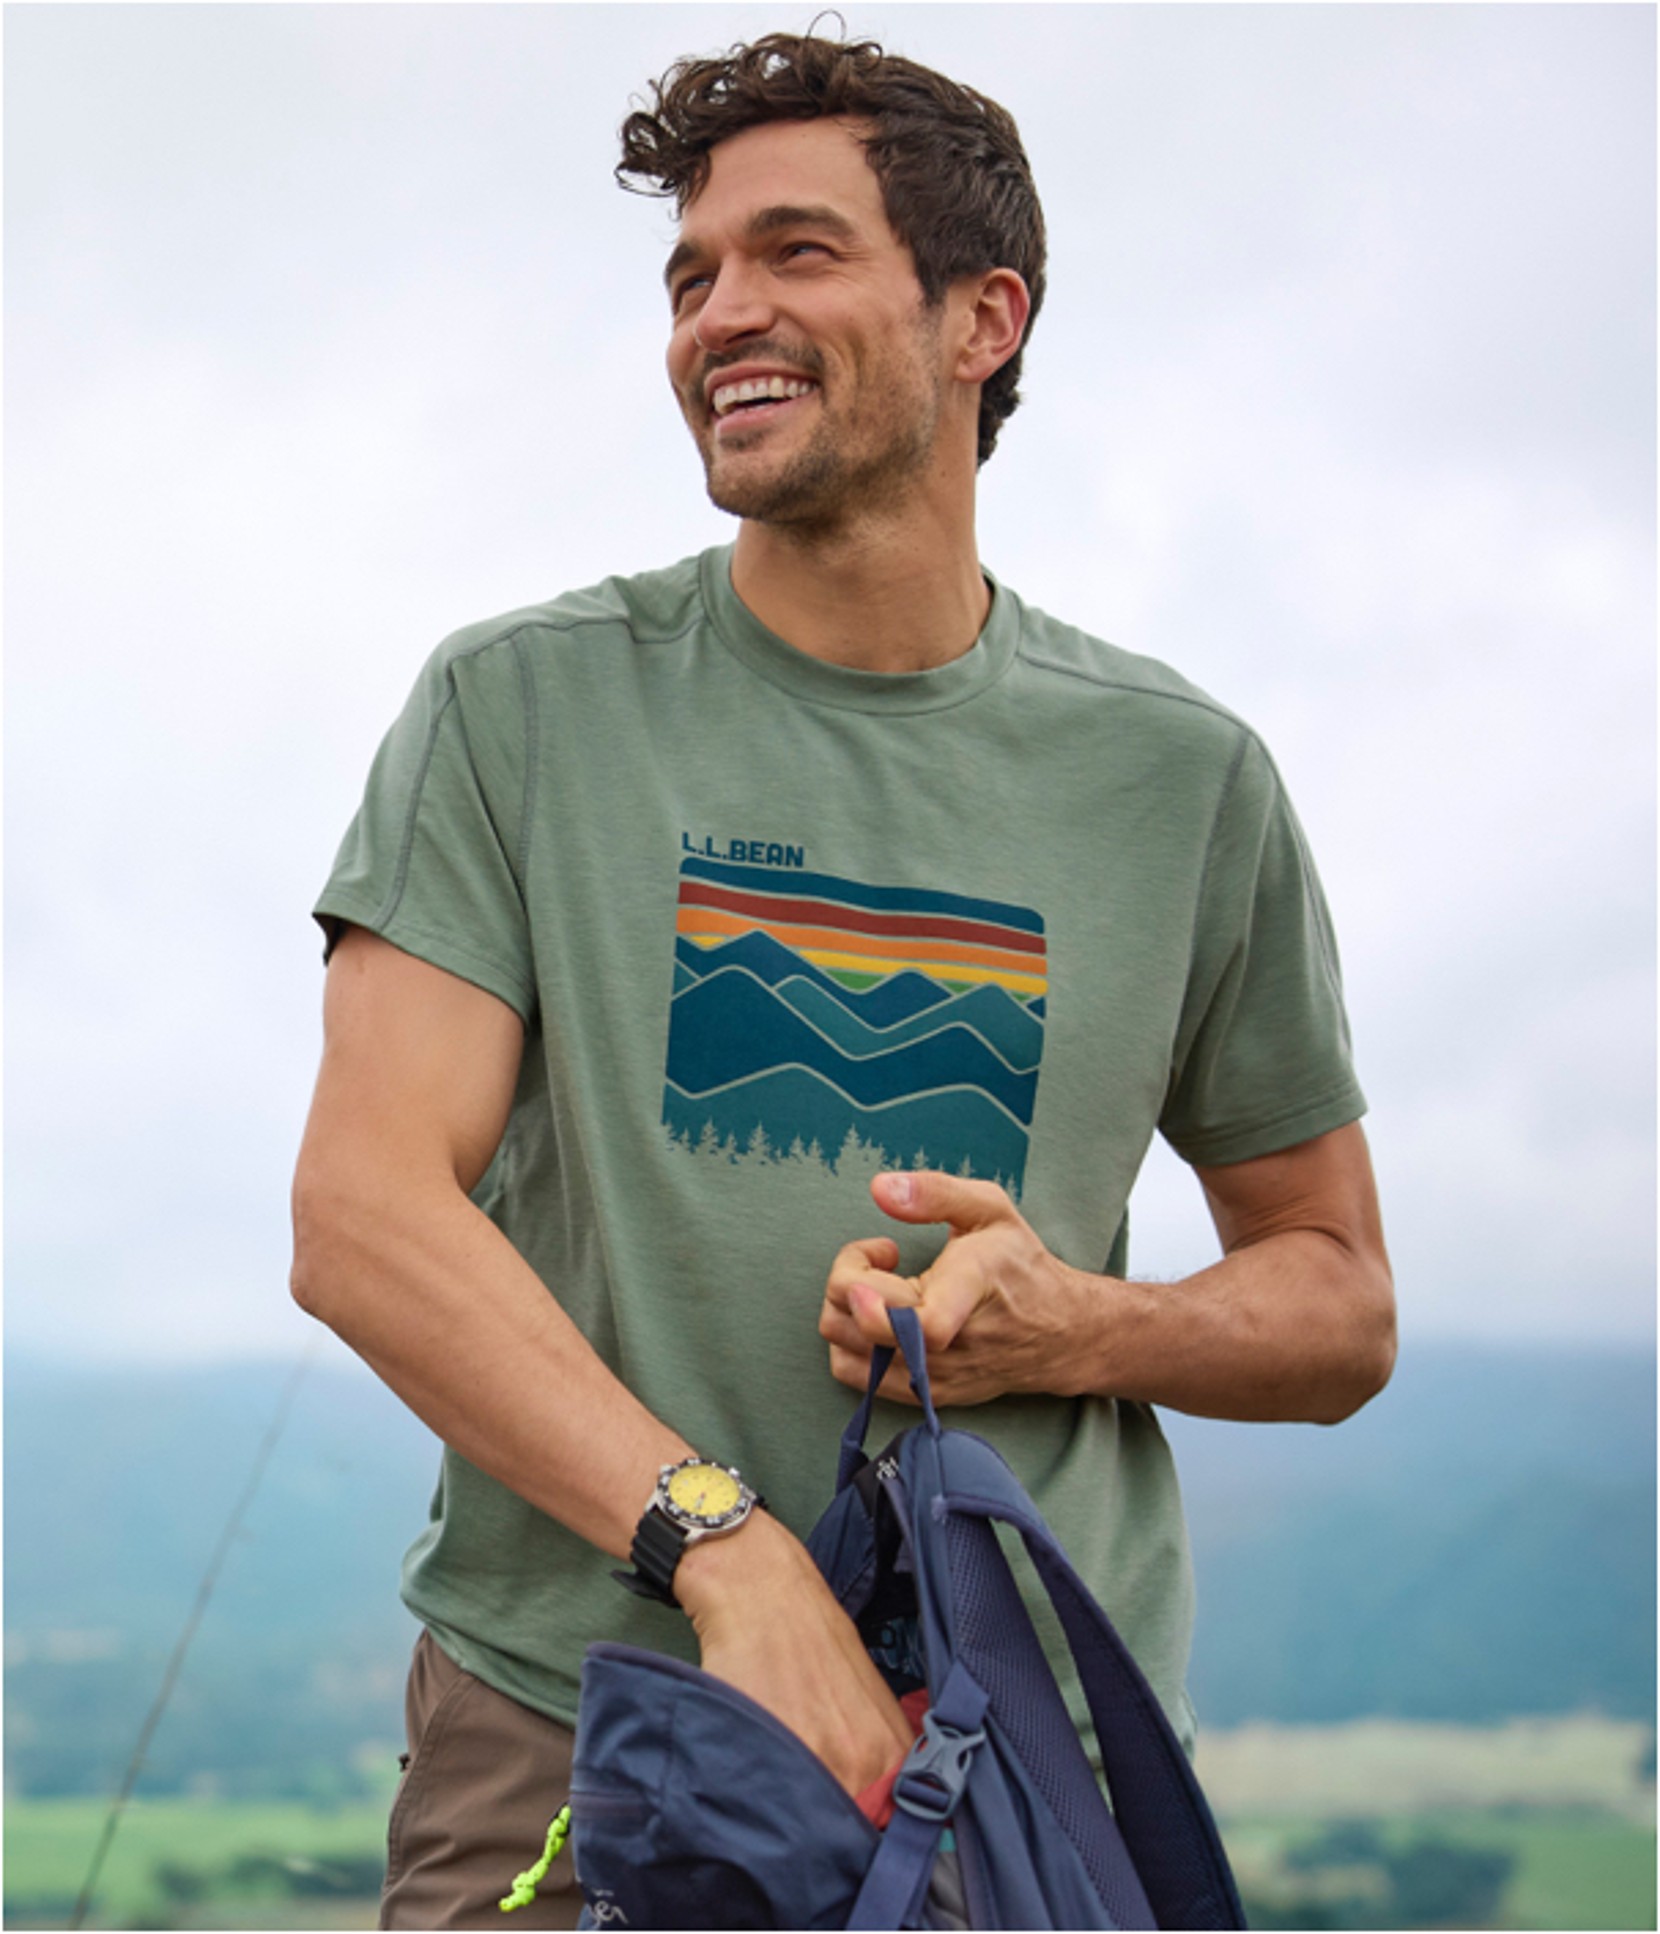 A man standing outside in a Sunsmart Tee reaching into his day pack.